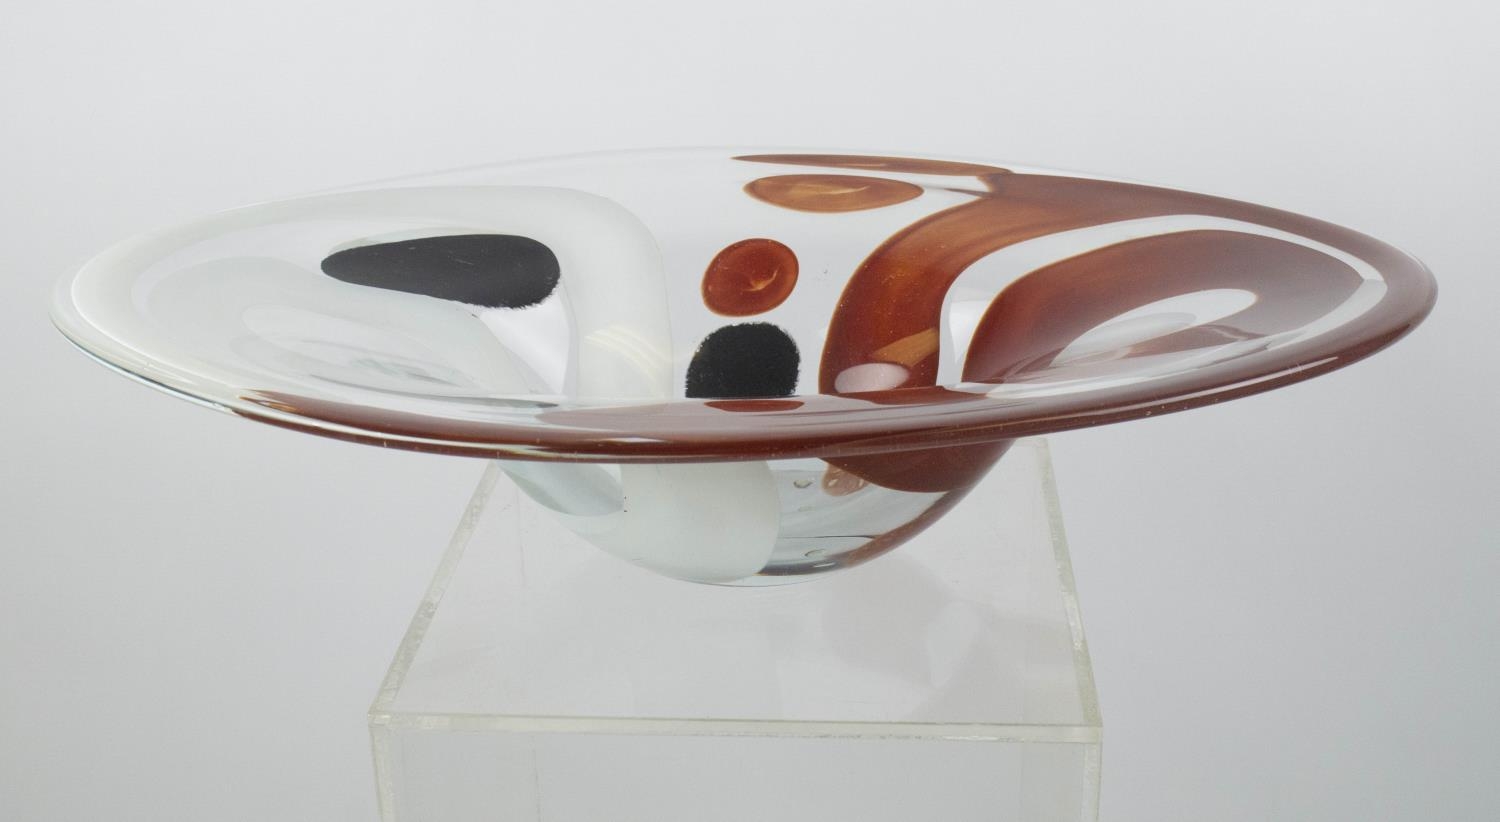 ART GLASS BOWL, late 20th century shaped with red, white and black design, 52cm L x 39cm W x 13cm H. - Image 4 of 8